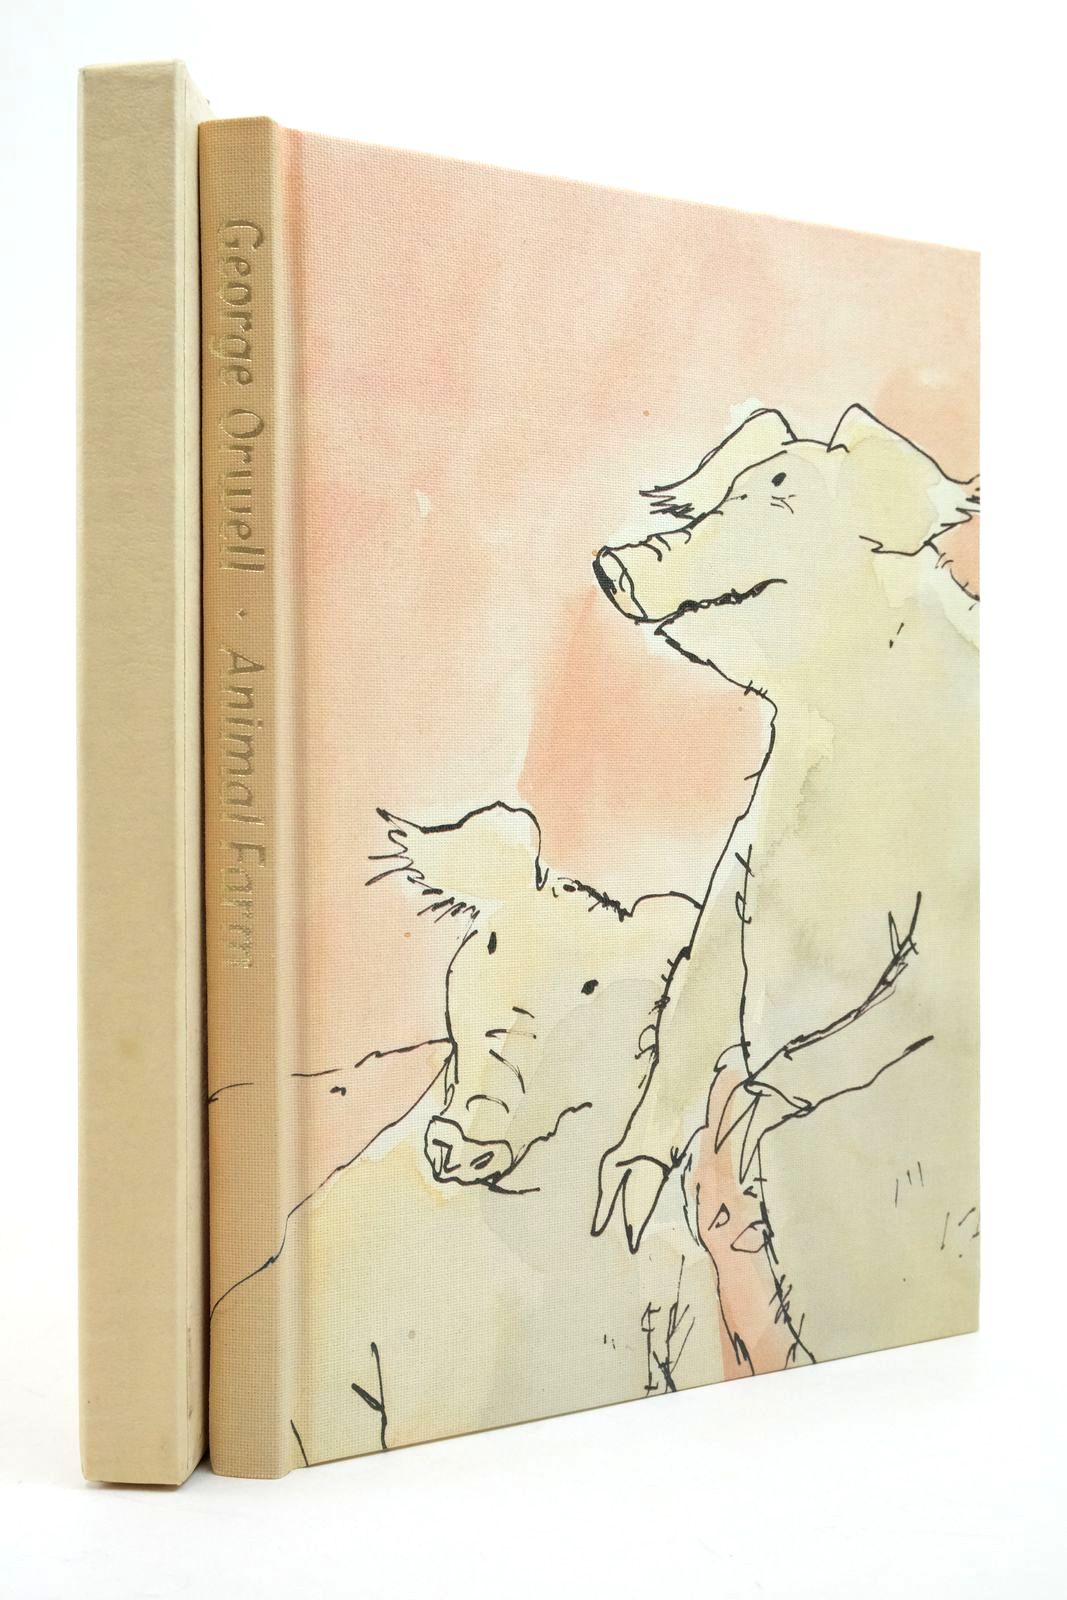 Photo of ANIMAL FARM: A FAIRY STORY written by Orwell, George illustrated by Blake, Quentin published by Folio Society (STOCK CODE: 2138800)  for sale by Stella & Rose's Books